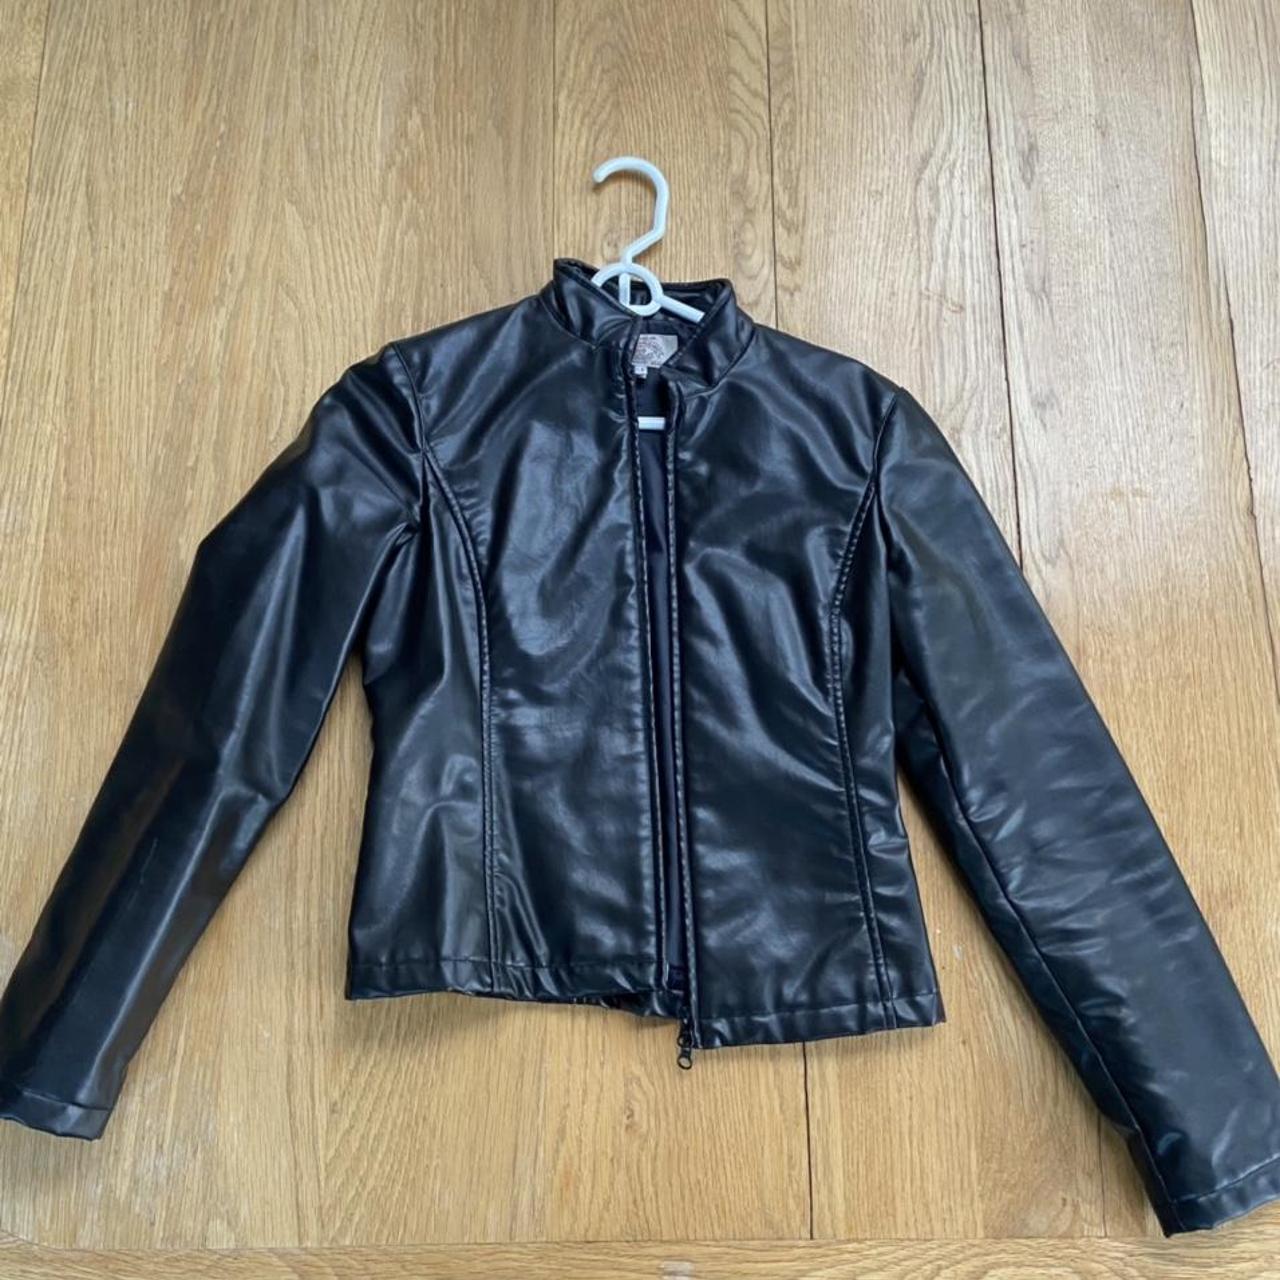 Cellini leather collection jacket. Has a punk feel - Depop